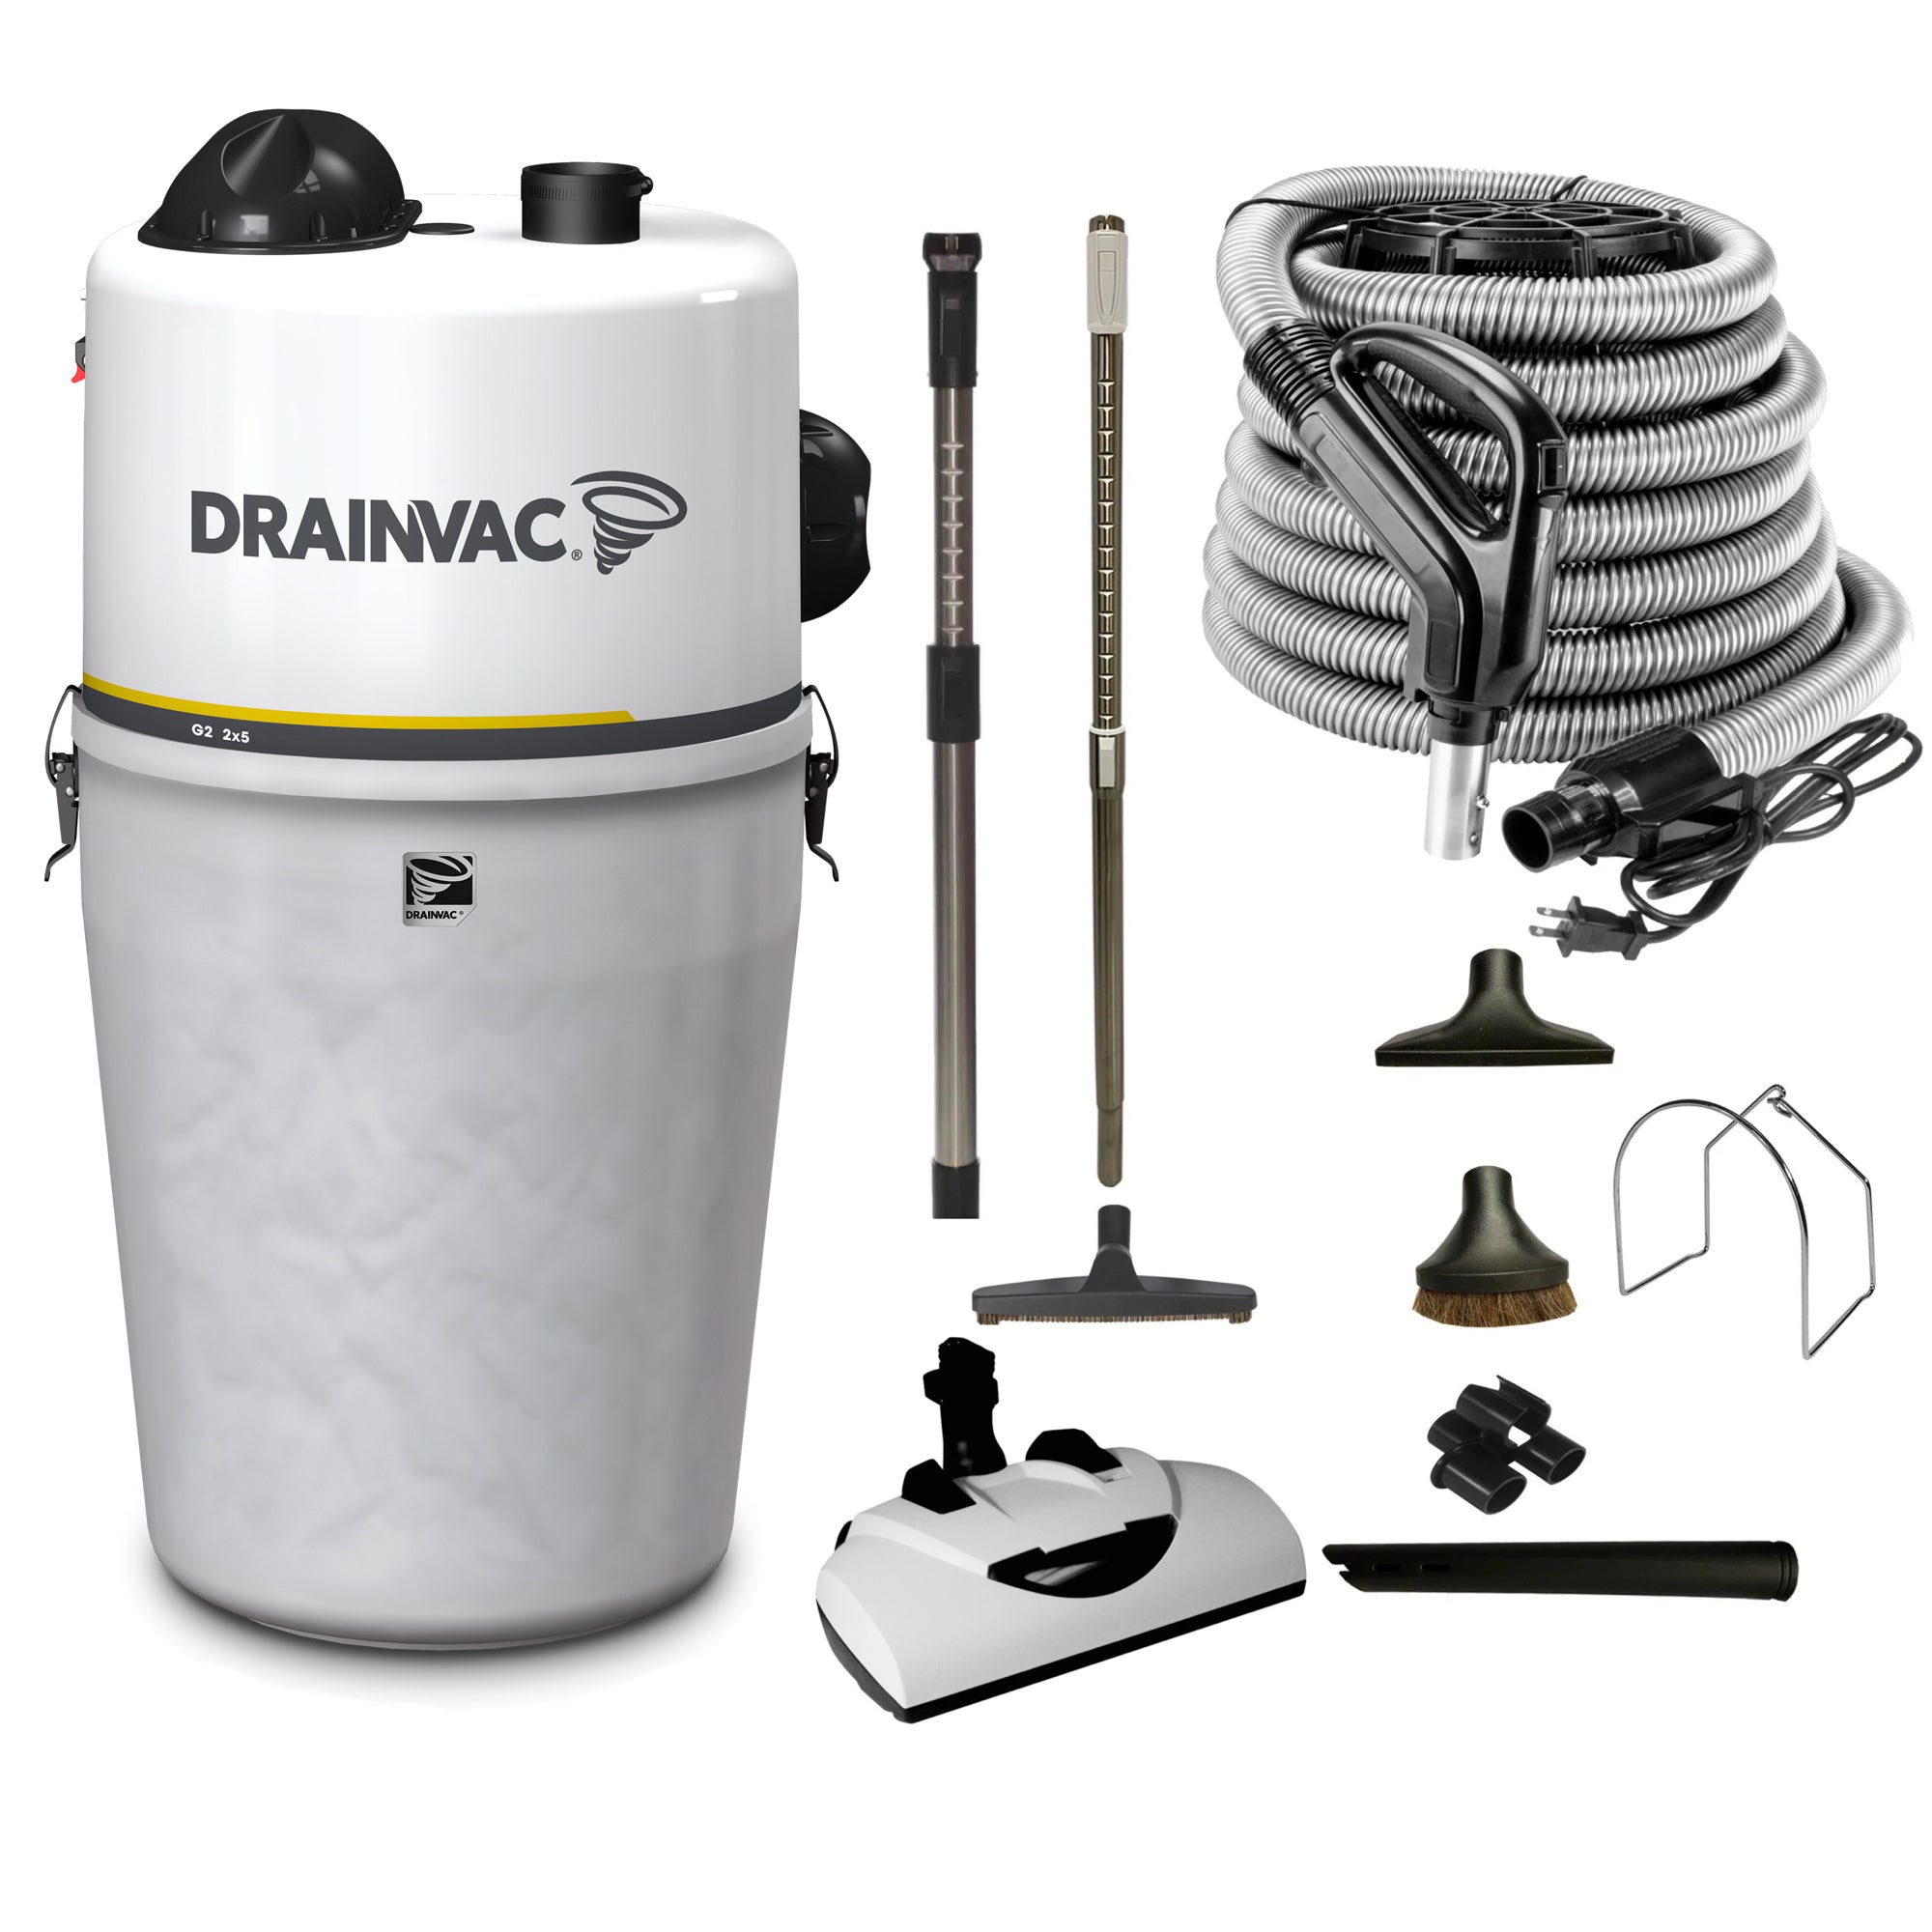 DrainVac G2-2x5 Central Vacuum with Wessel Werk EBK360 Electric Package